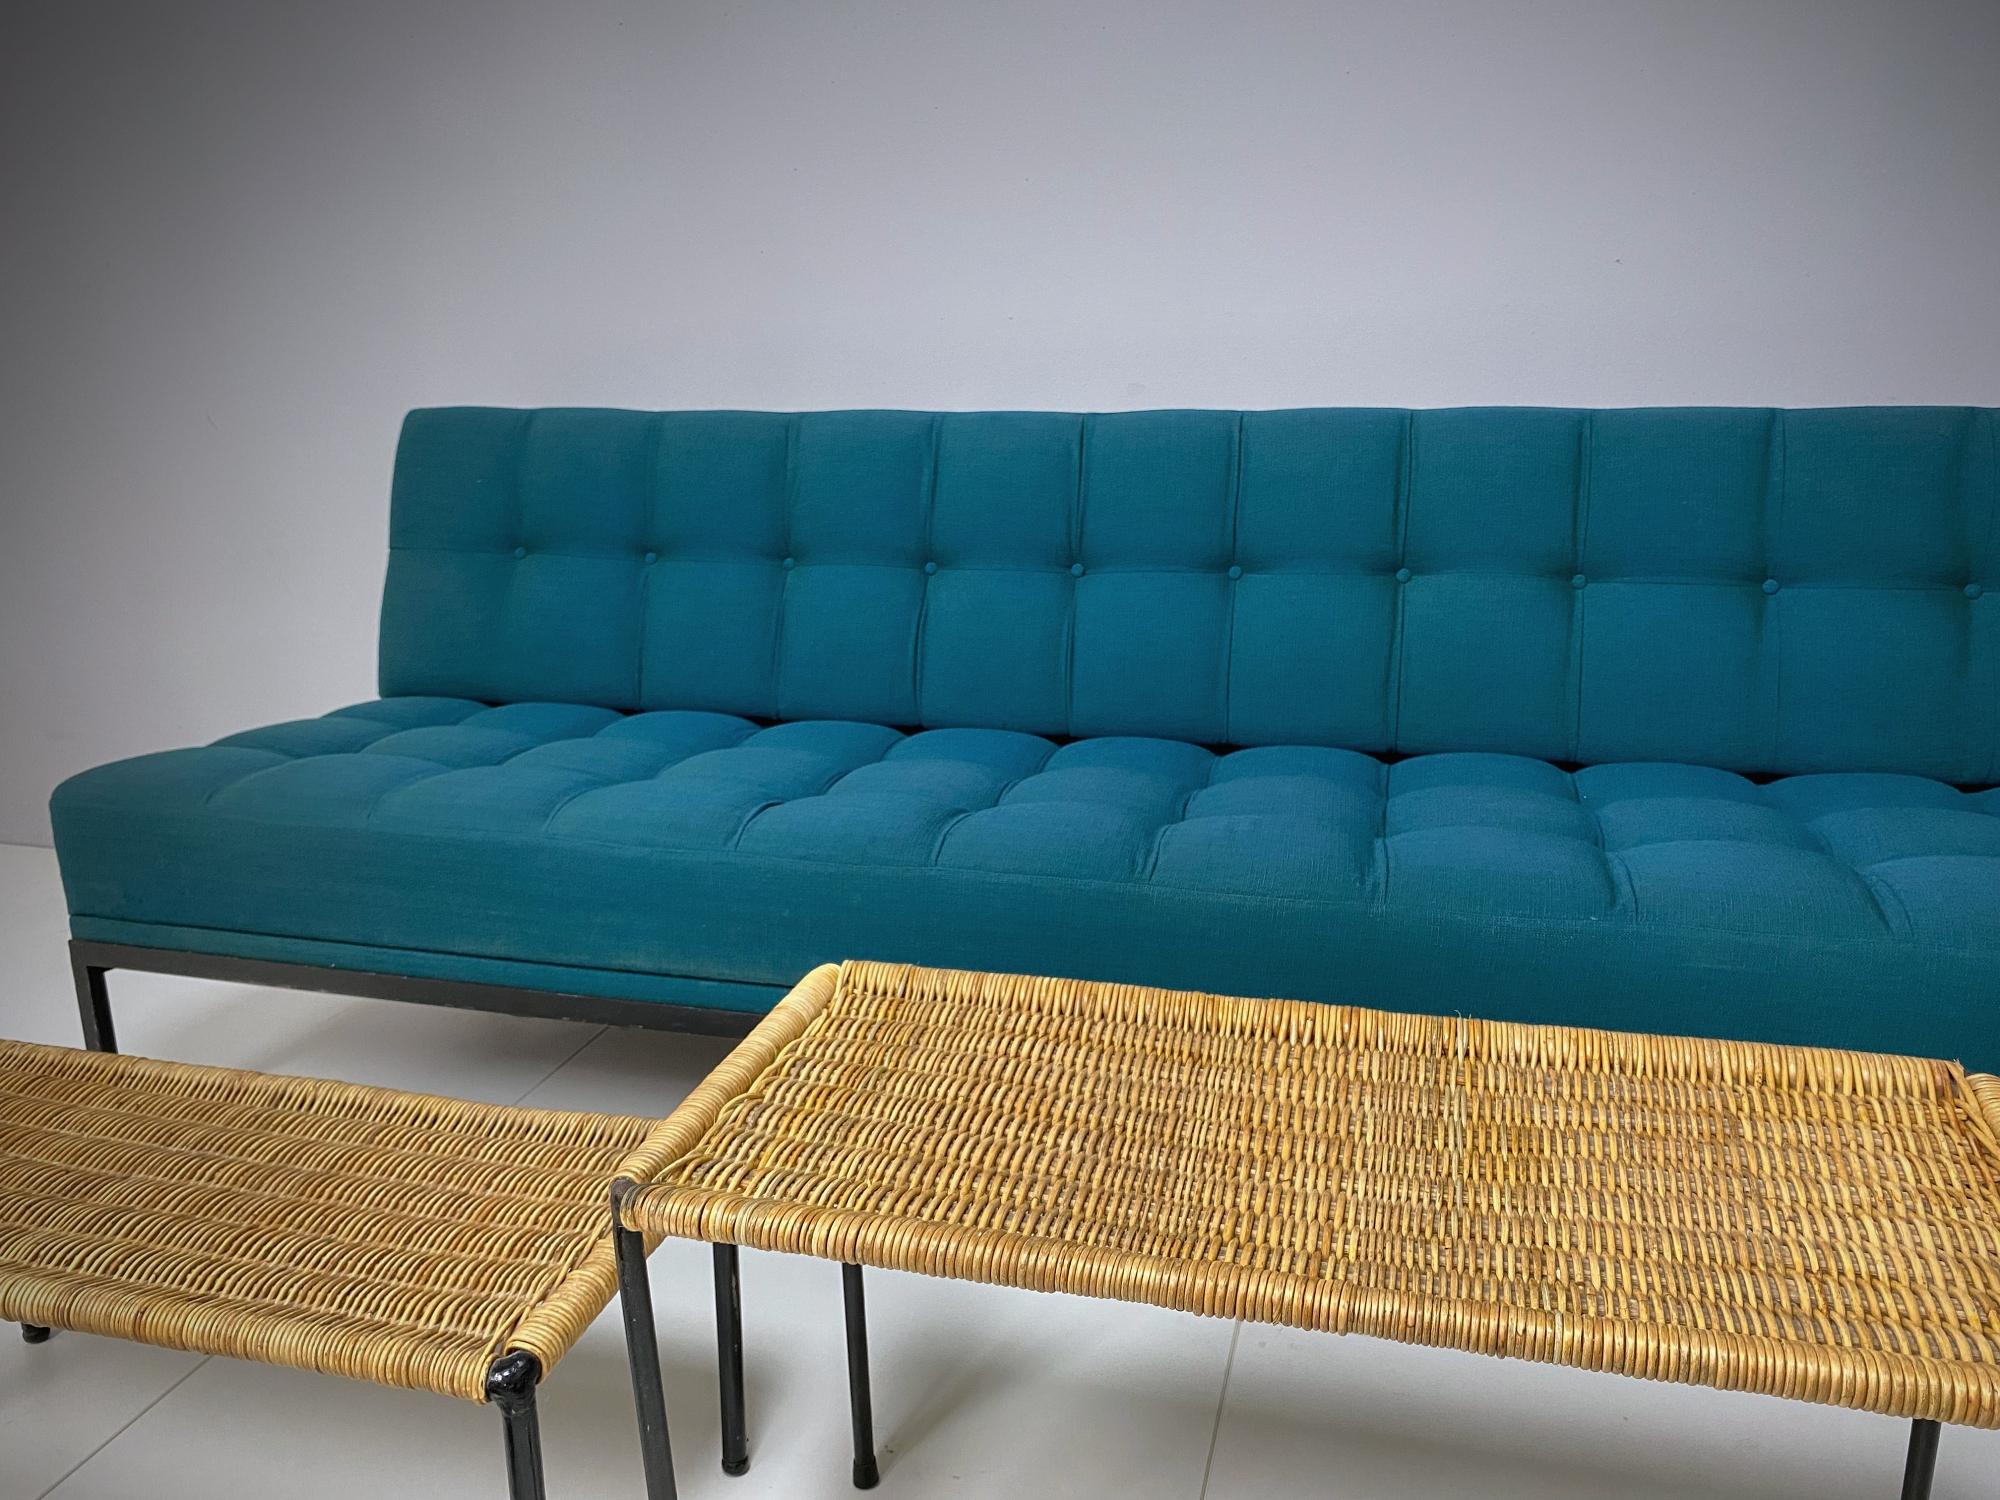 Wittmann Constanze Tufted Midcentury Sofa & Chairs by J. Spalt, 1970s, Austria For Sale 3